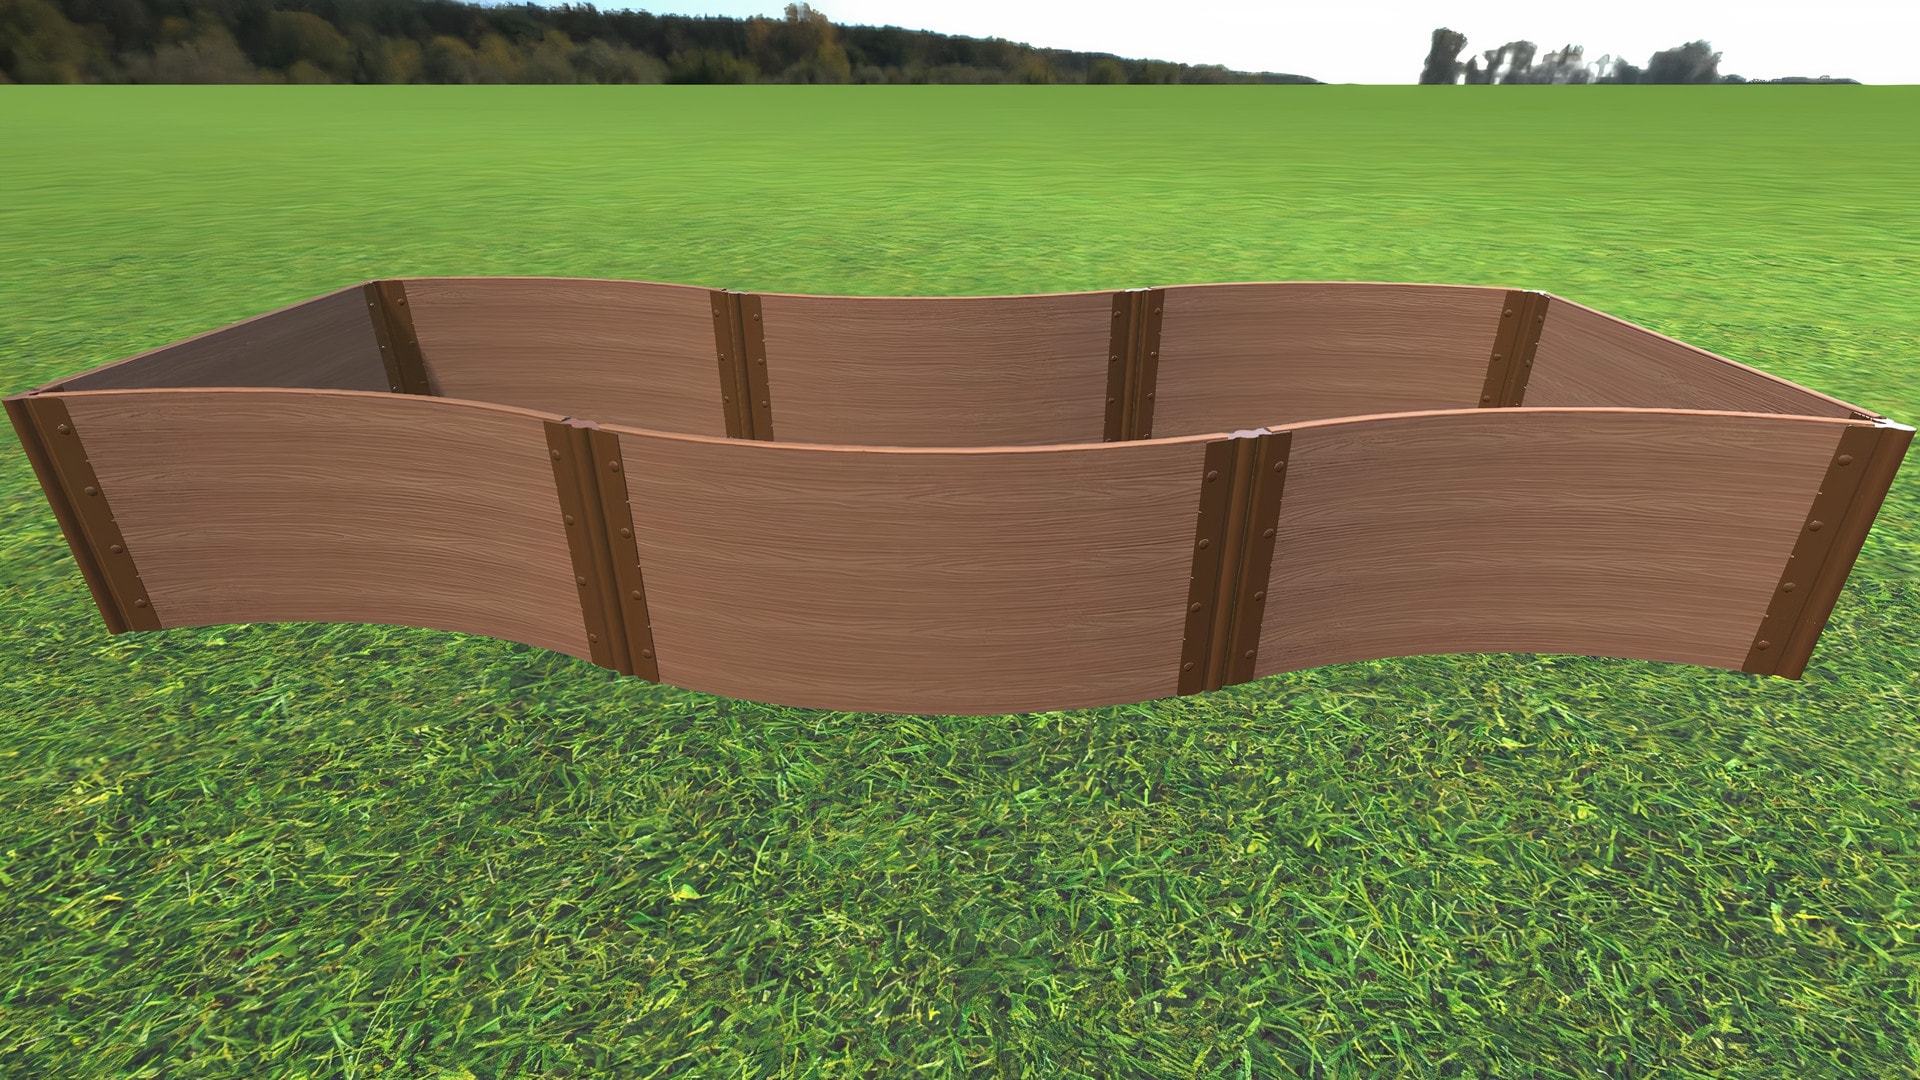 Tool-Free 'Lazy Curve' - 4' x 12' Raised Garden Bed Raised Garden Beds Frame It All Classic Sienna 1" 4 = 22"